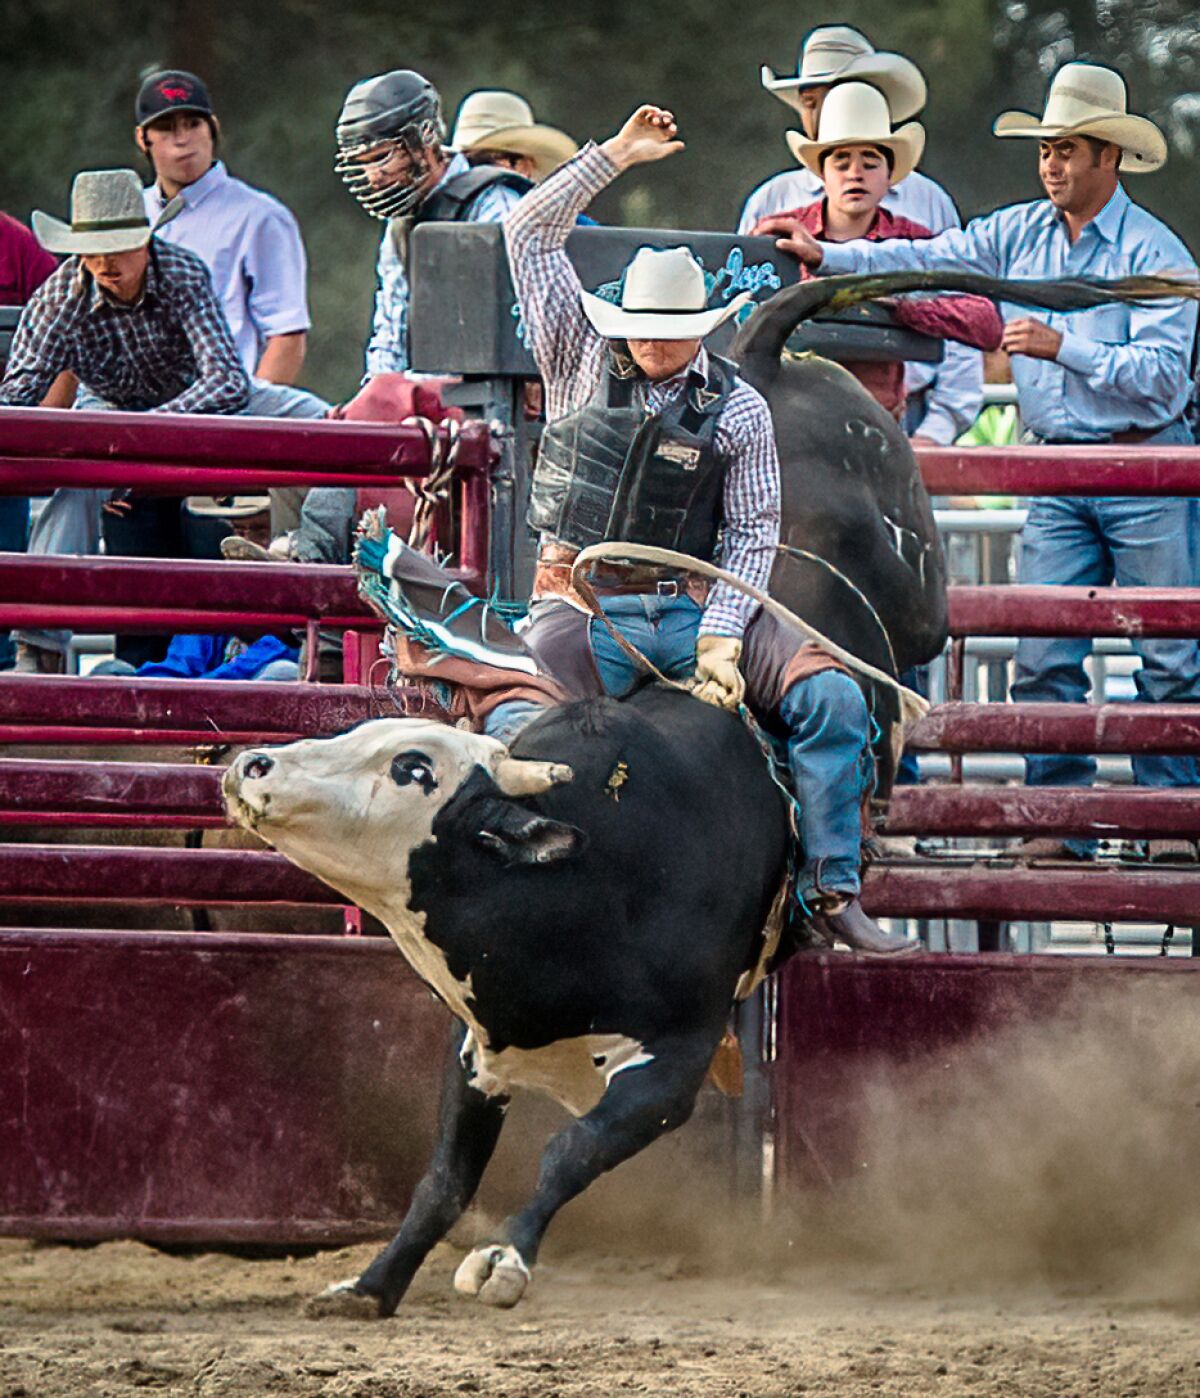 41st annual Ramona Rodeo to feature riding and timed events, barrel